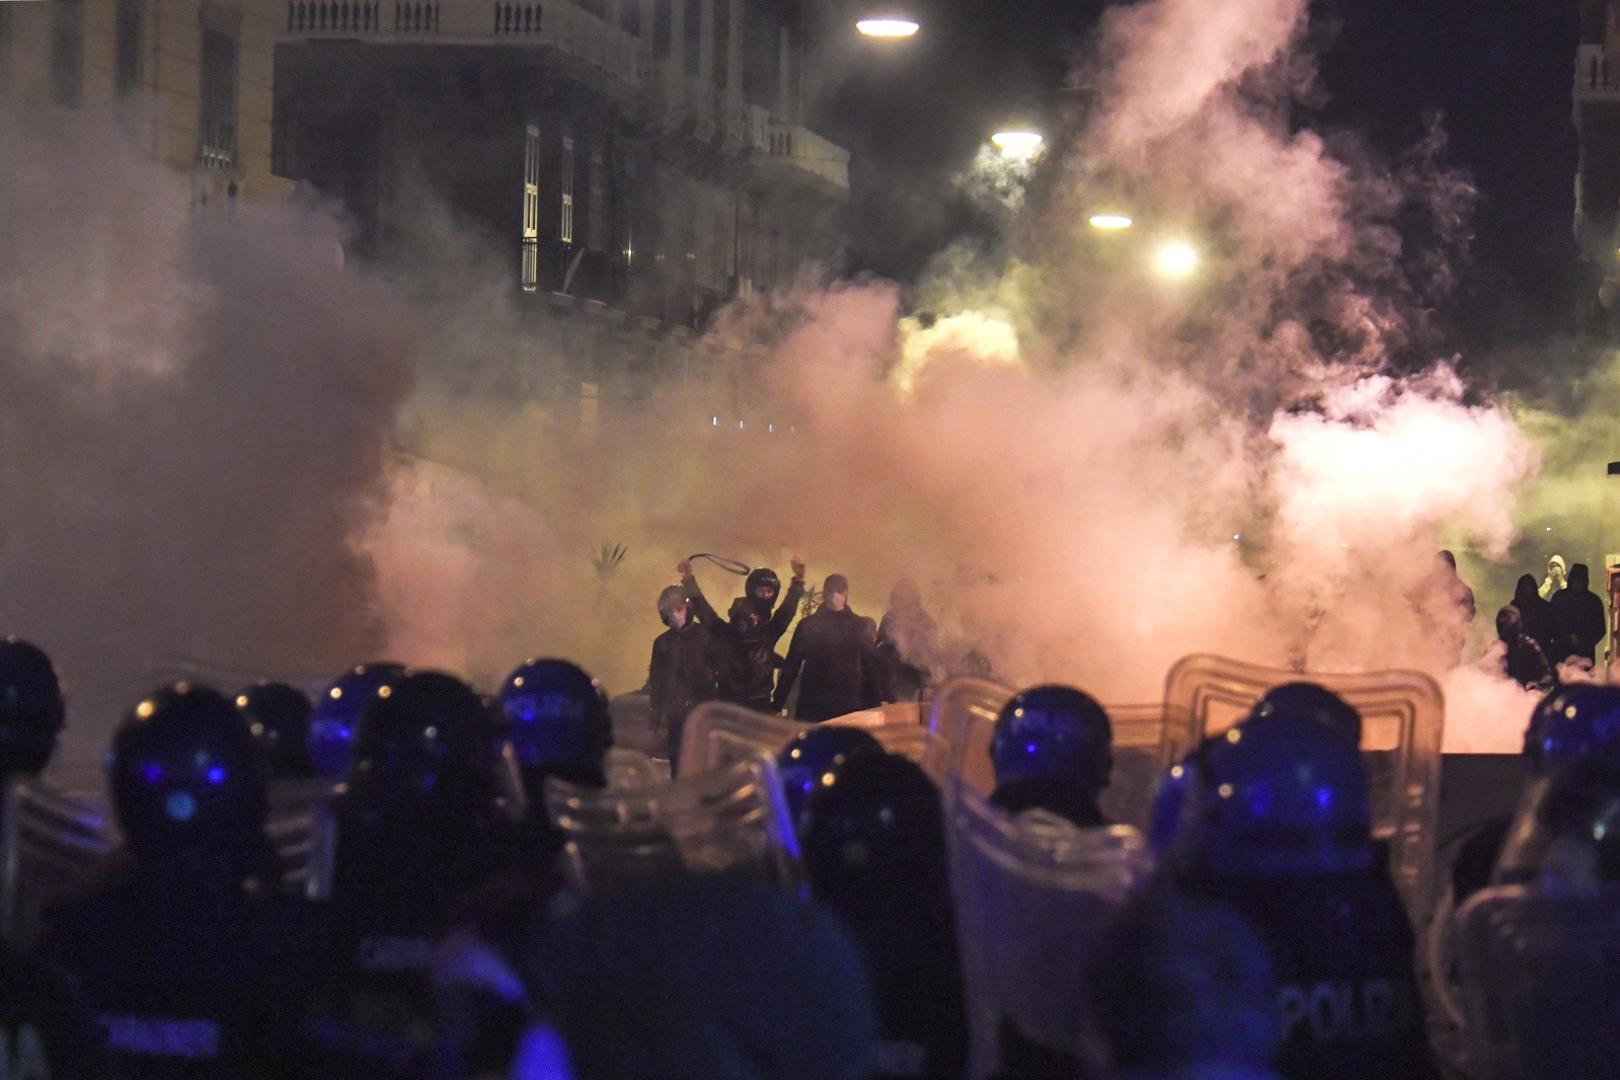 Hundreds of people clash against police during the protest over the curfew and the prospect of lockdown in Naples. The governor of Campania ordered from 23 October, a curfew from 11 pm till morning due to spike in coronavirus infections in the region /IPA/PIXSELLPhoto: IPA/PIXSELL